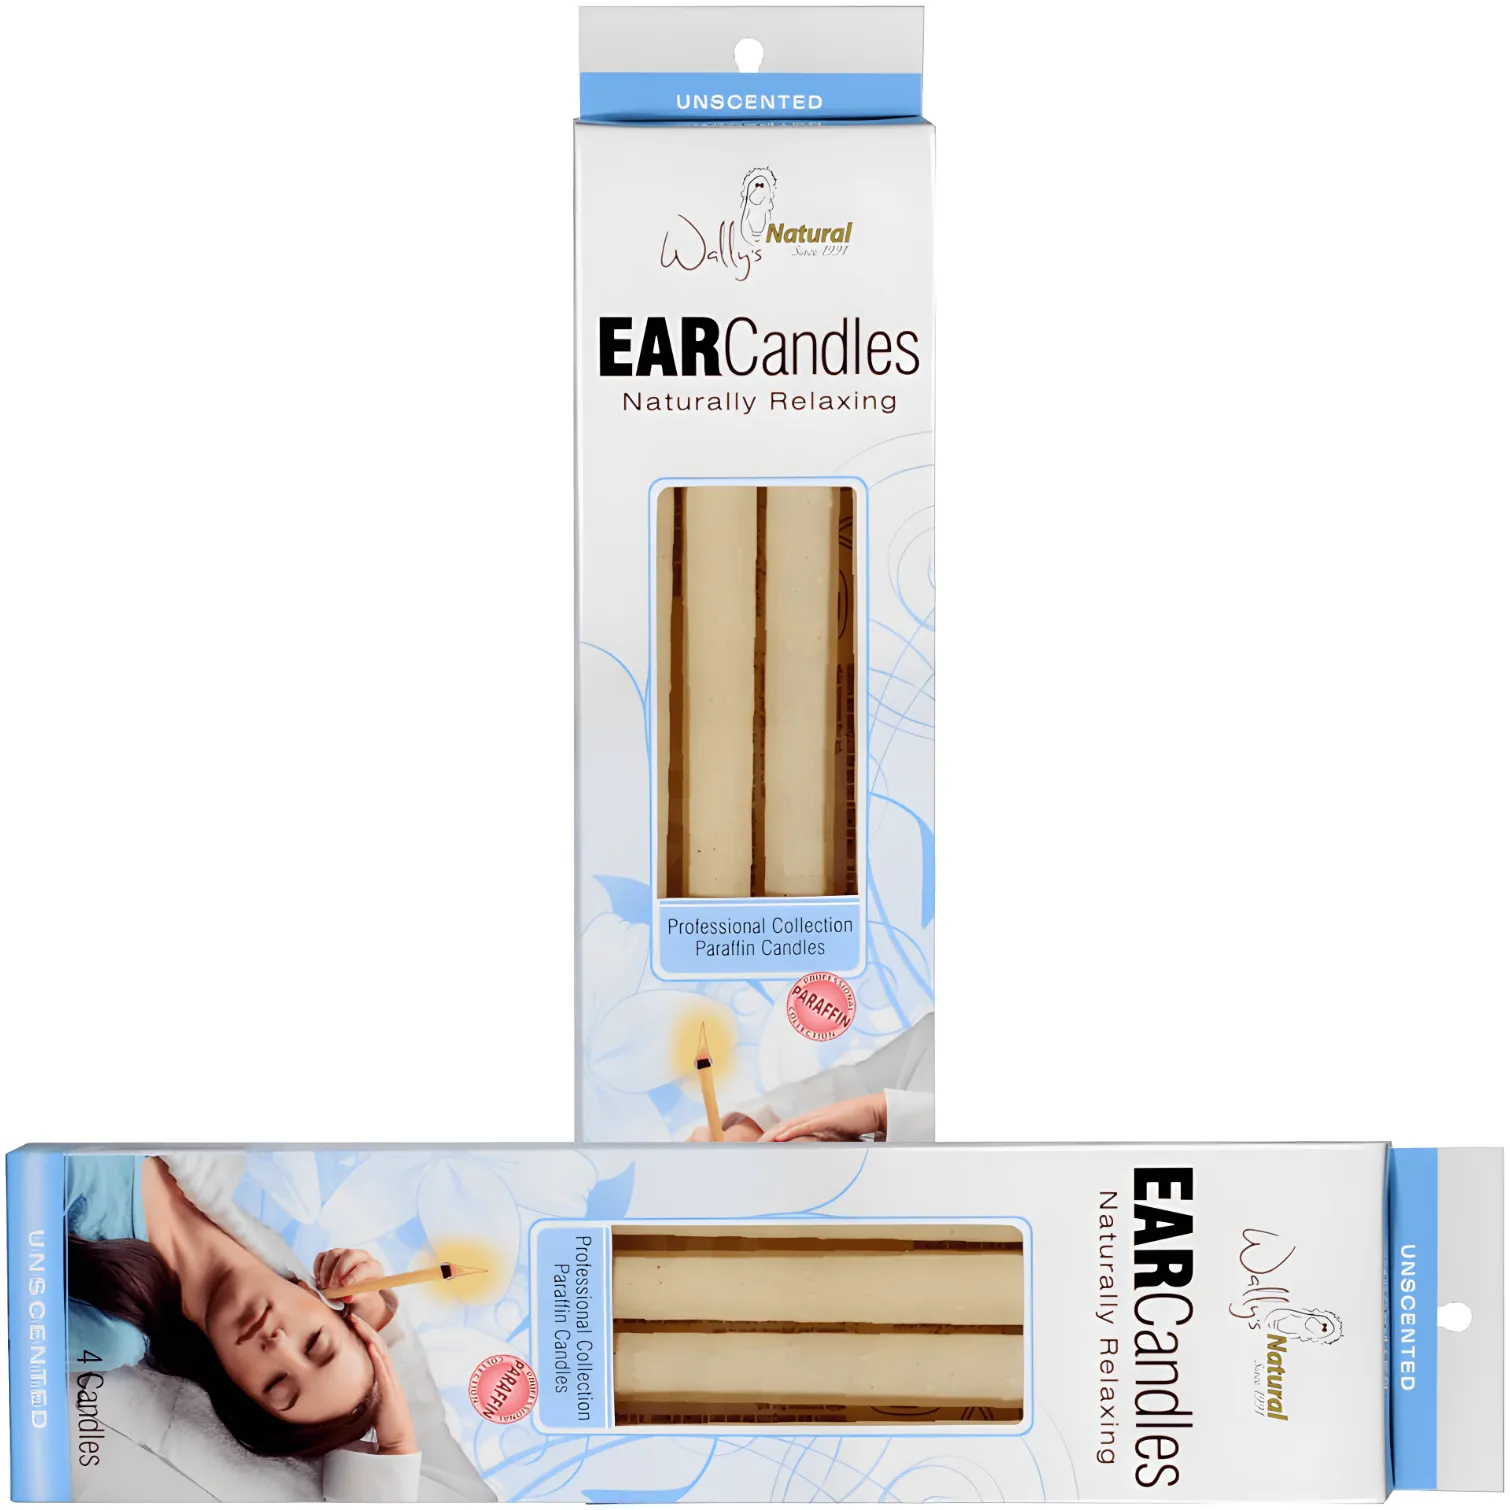 Free Wally's Natural Unscented Ear Candles